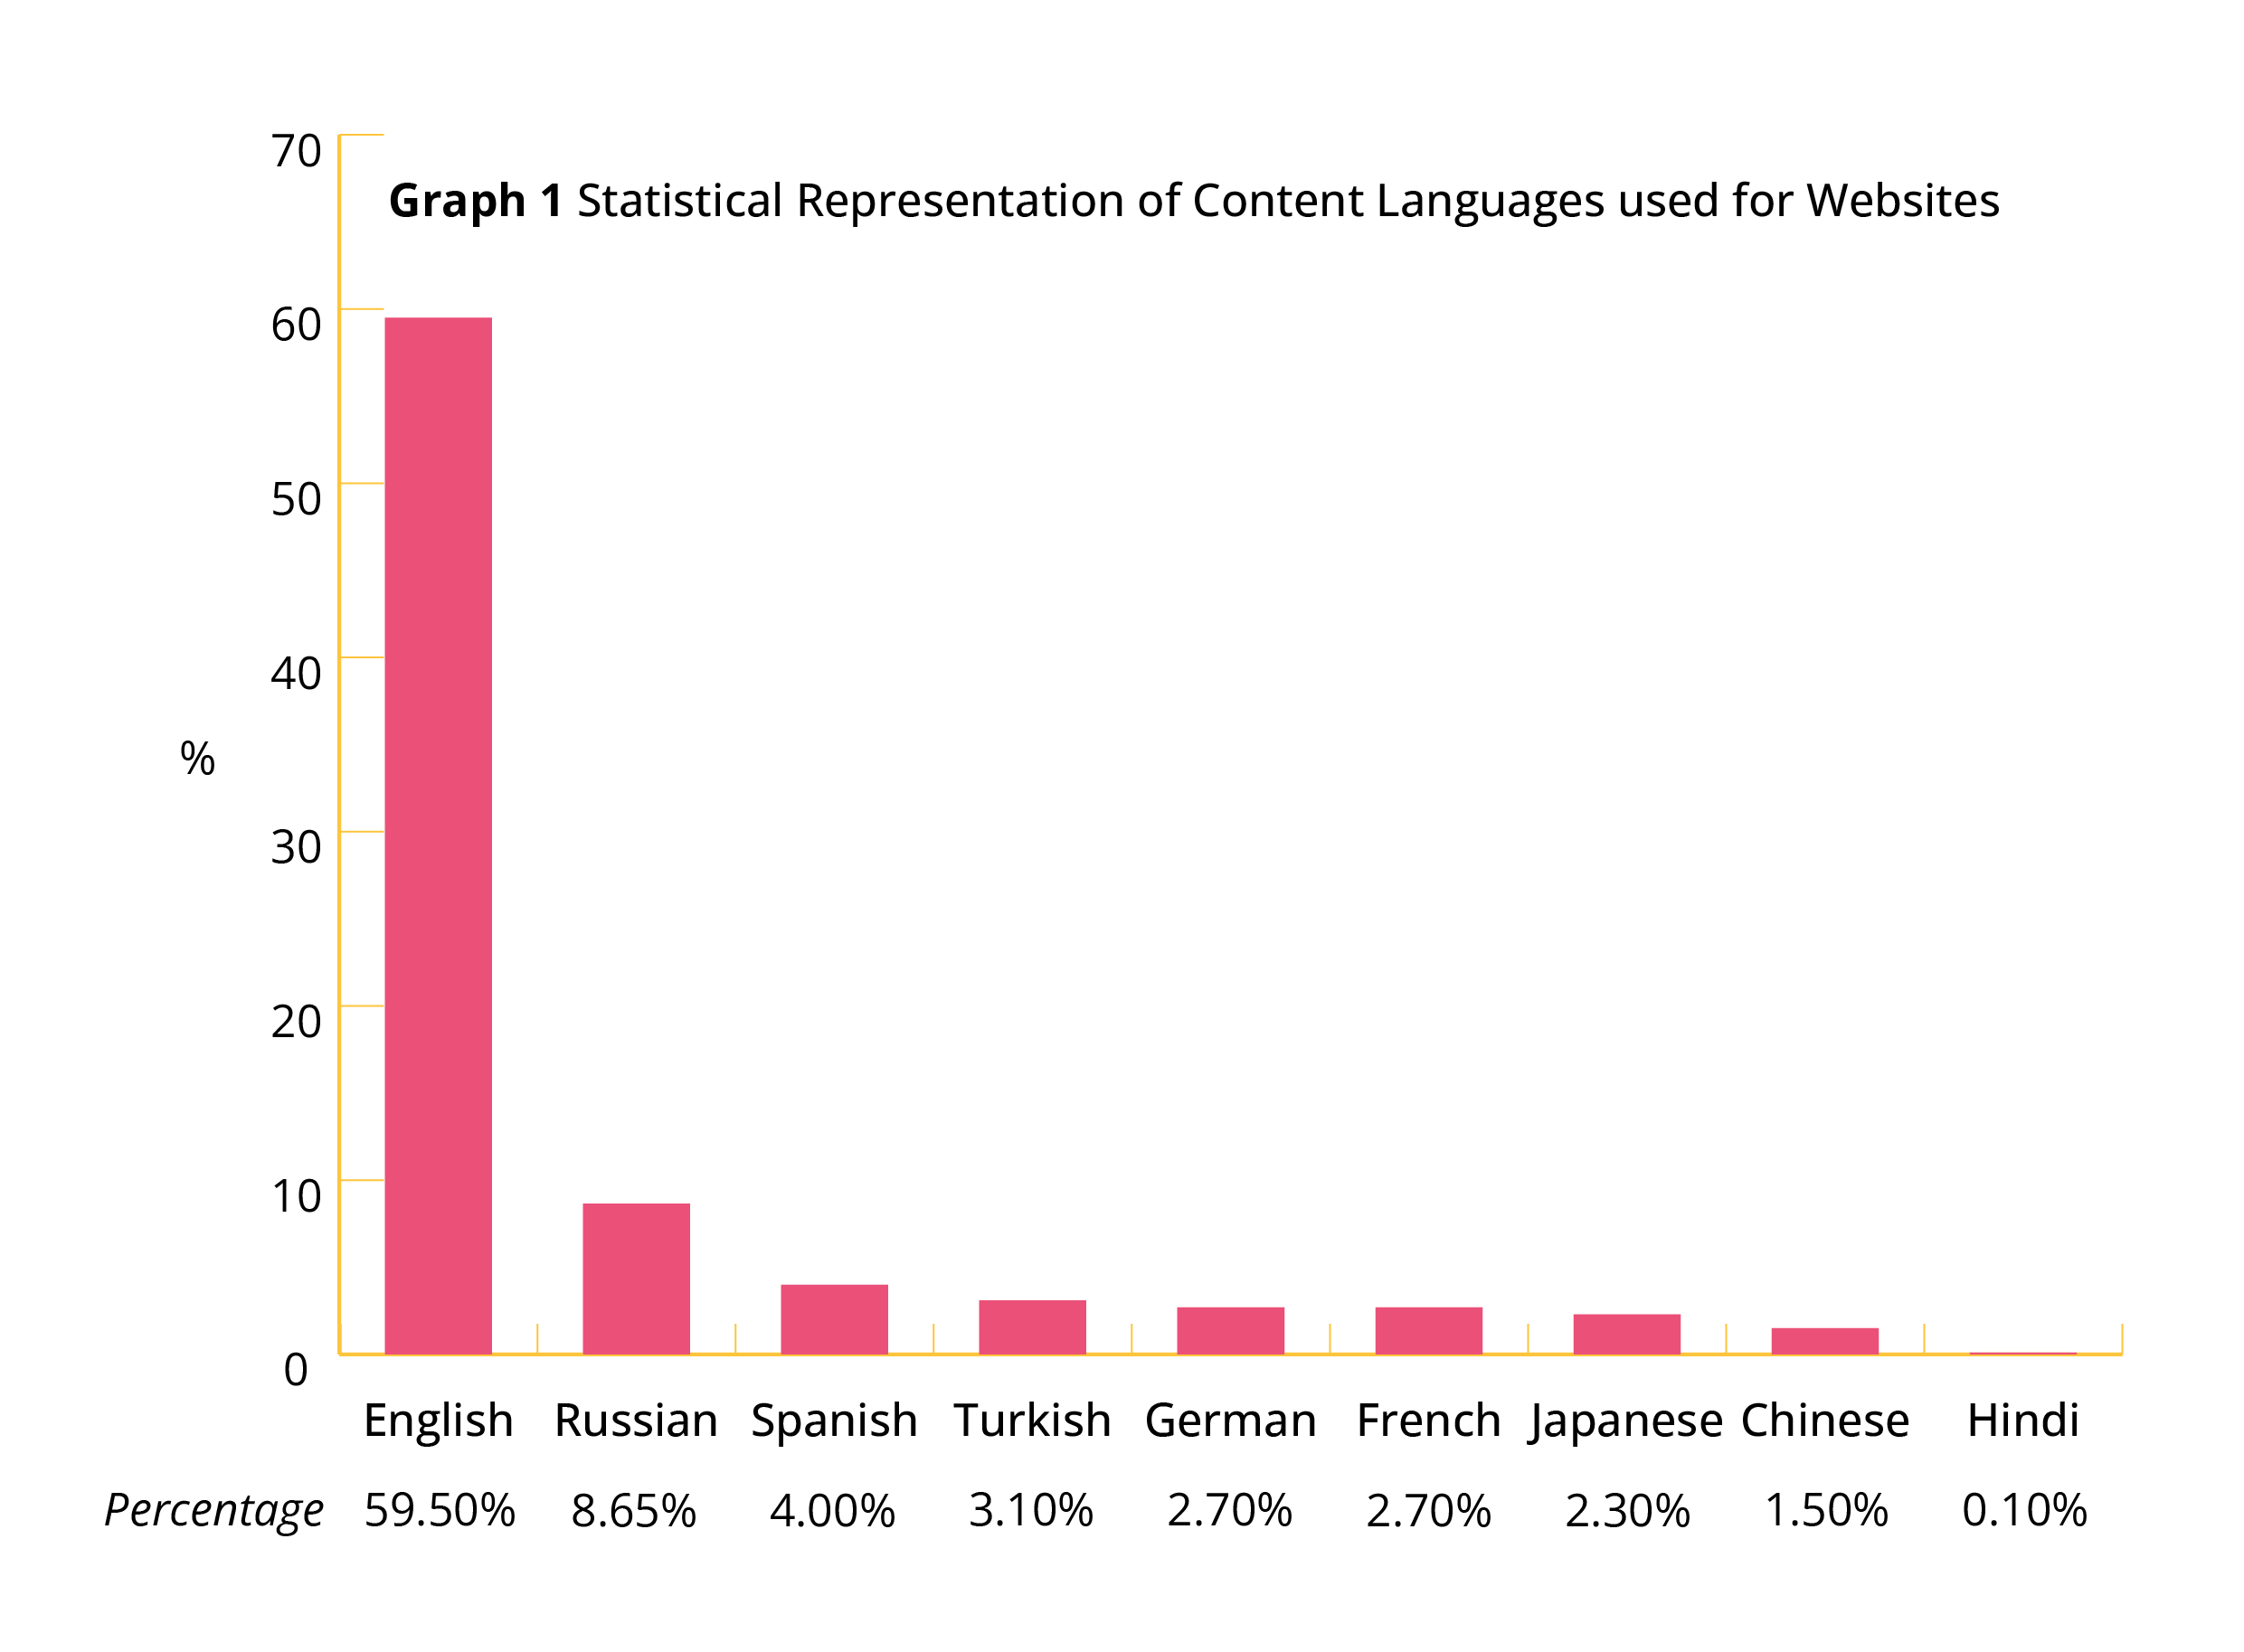 A graph showing the percentage of content languages used in websites. These languages include English, Russian, Spanish, Turkish, German, French, Japanese, Chinese, Hindi.